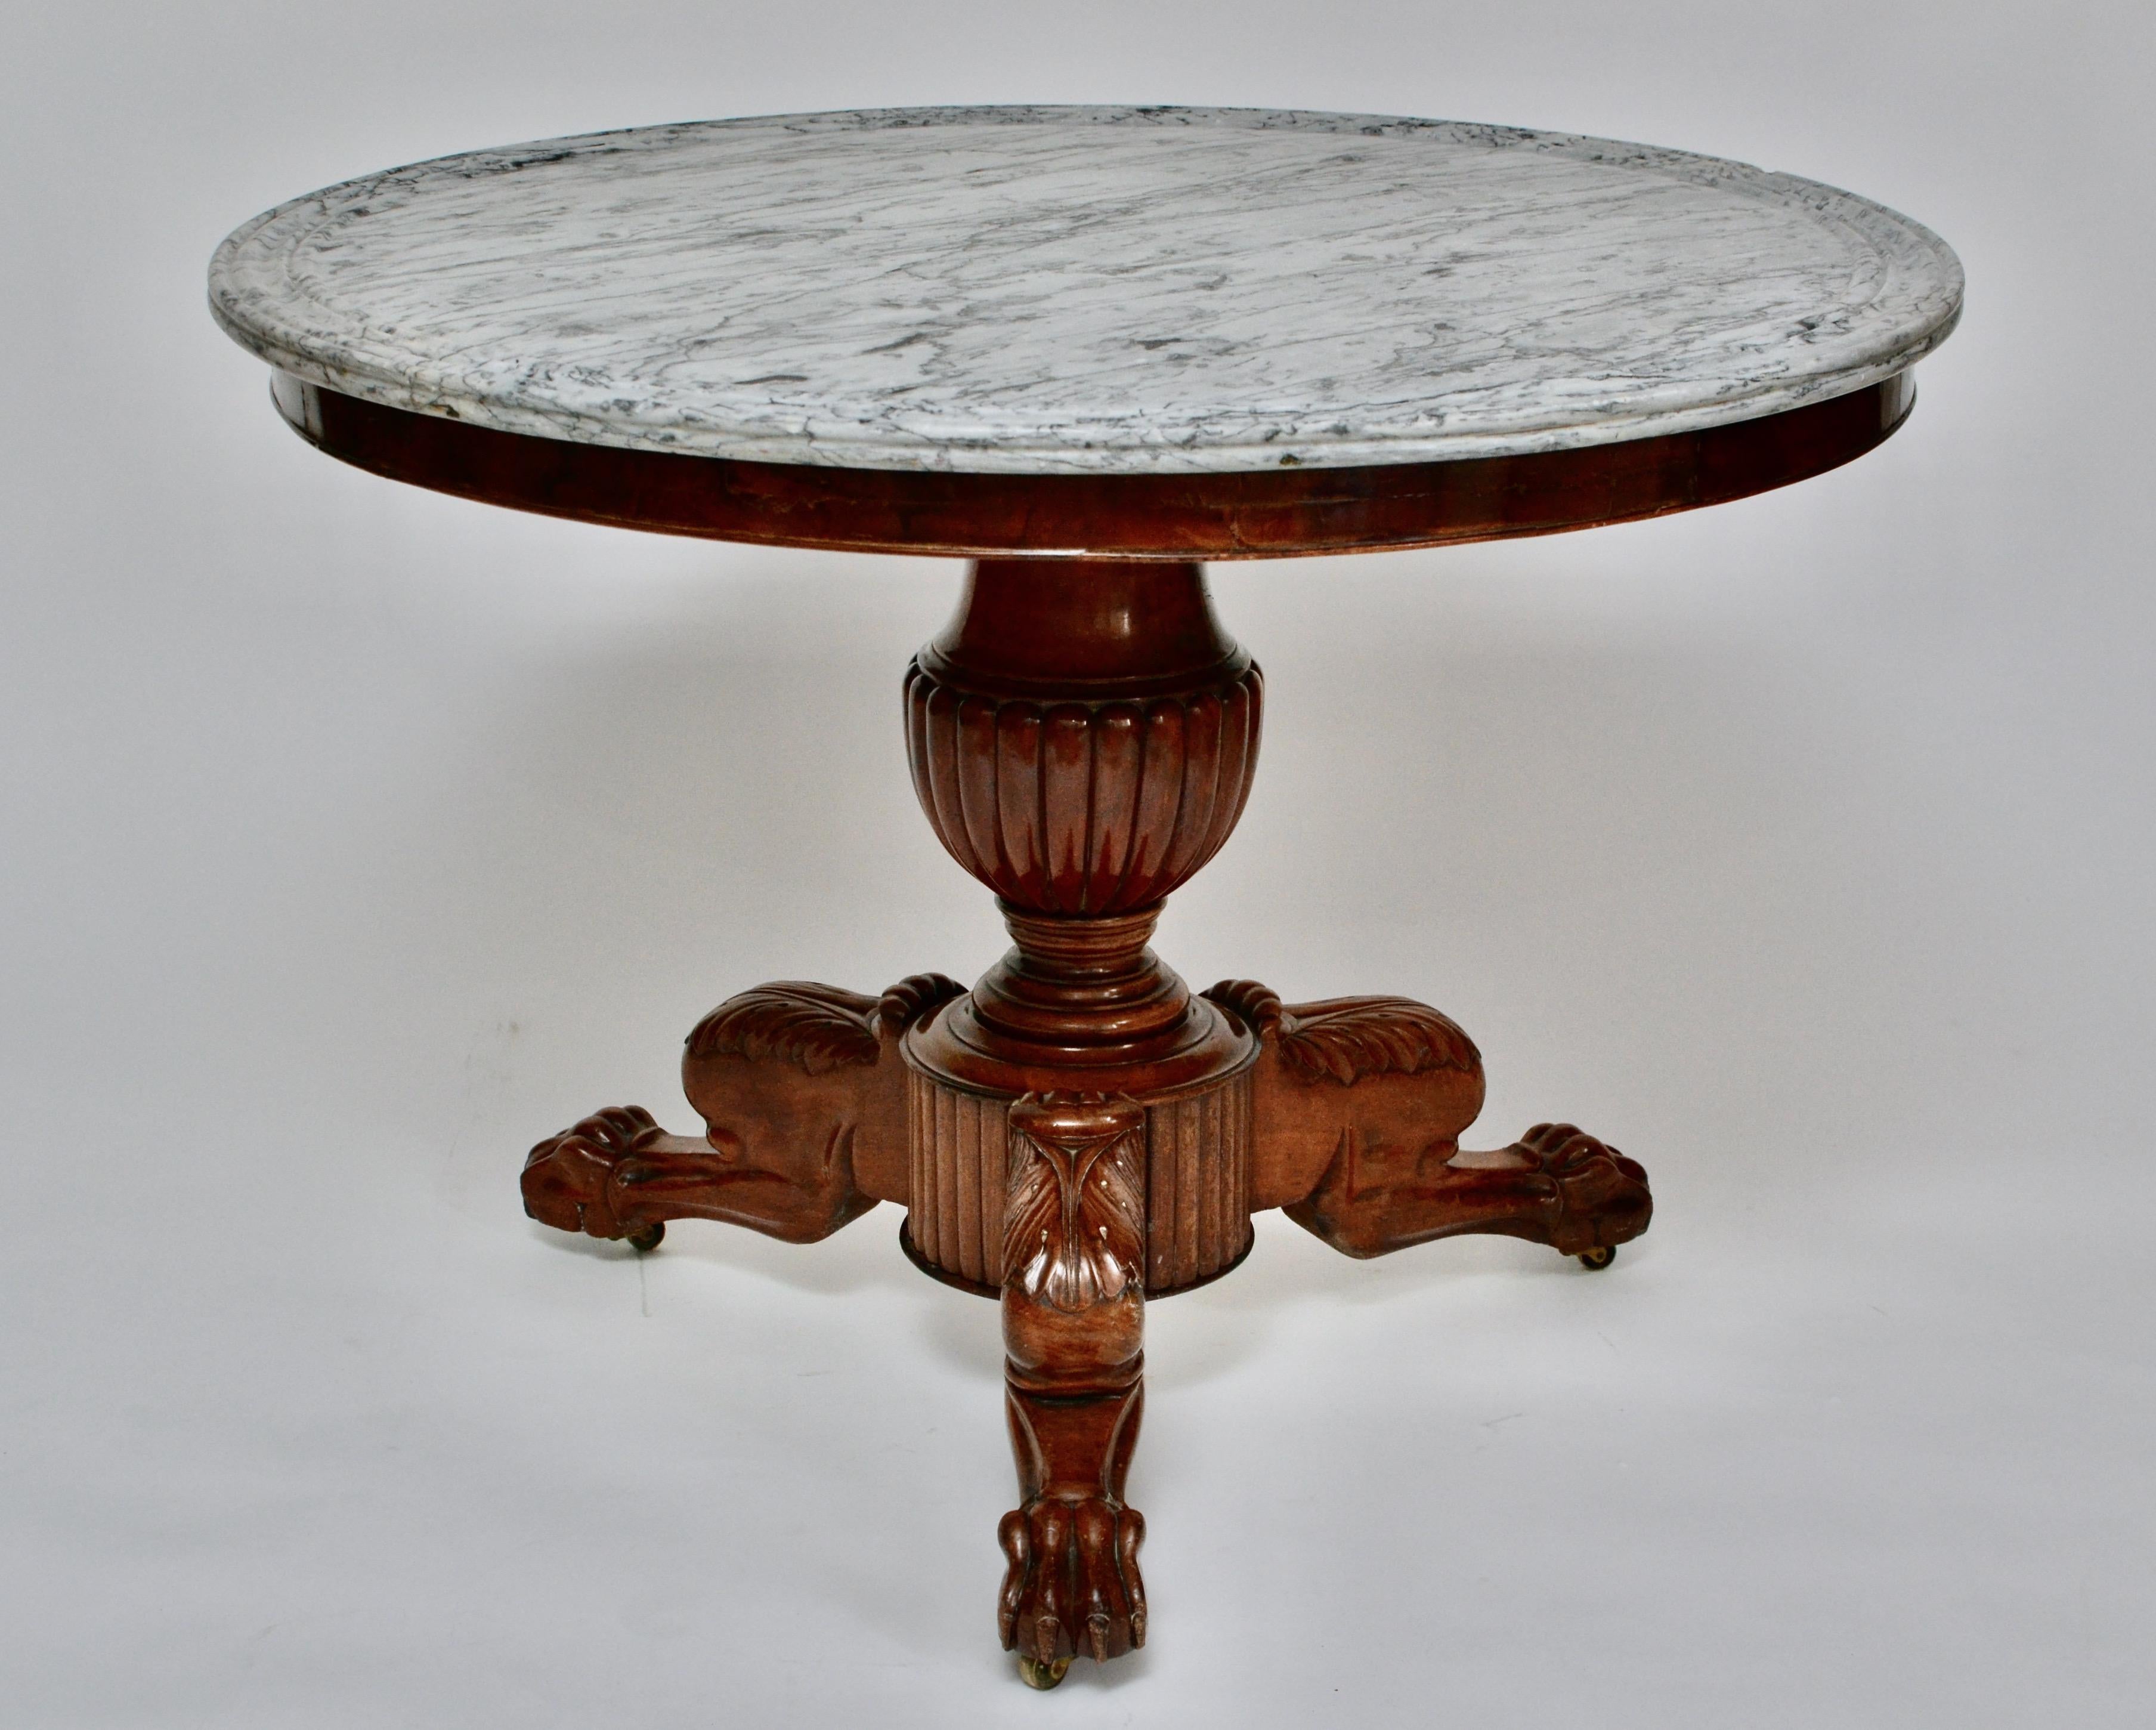 Hand-Carved French Empire Mahogany Gueridon Table with a Grey Marble Top